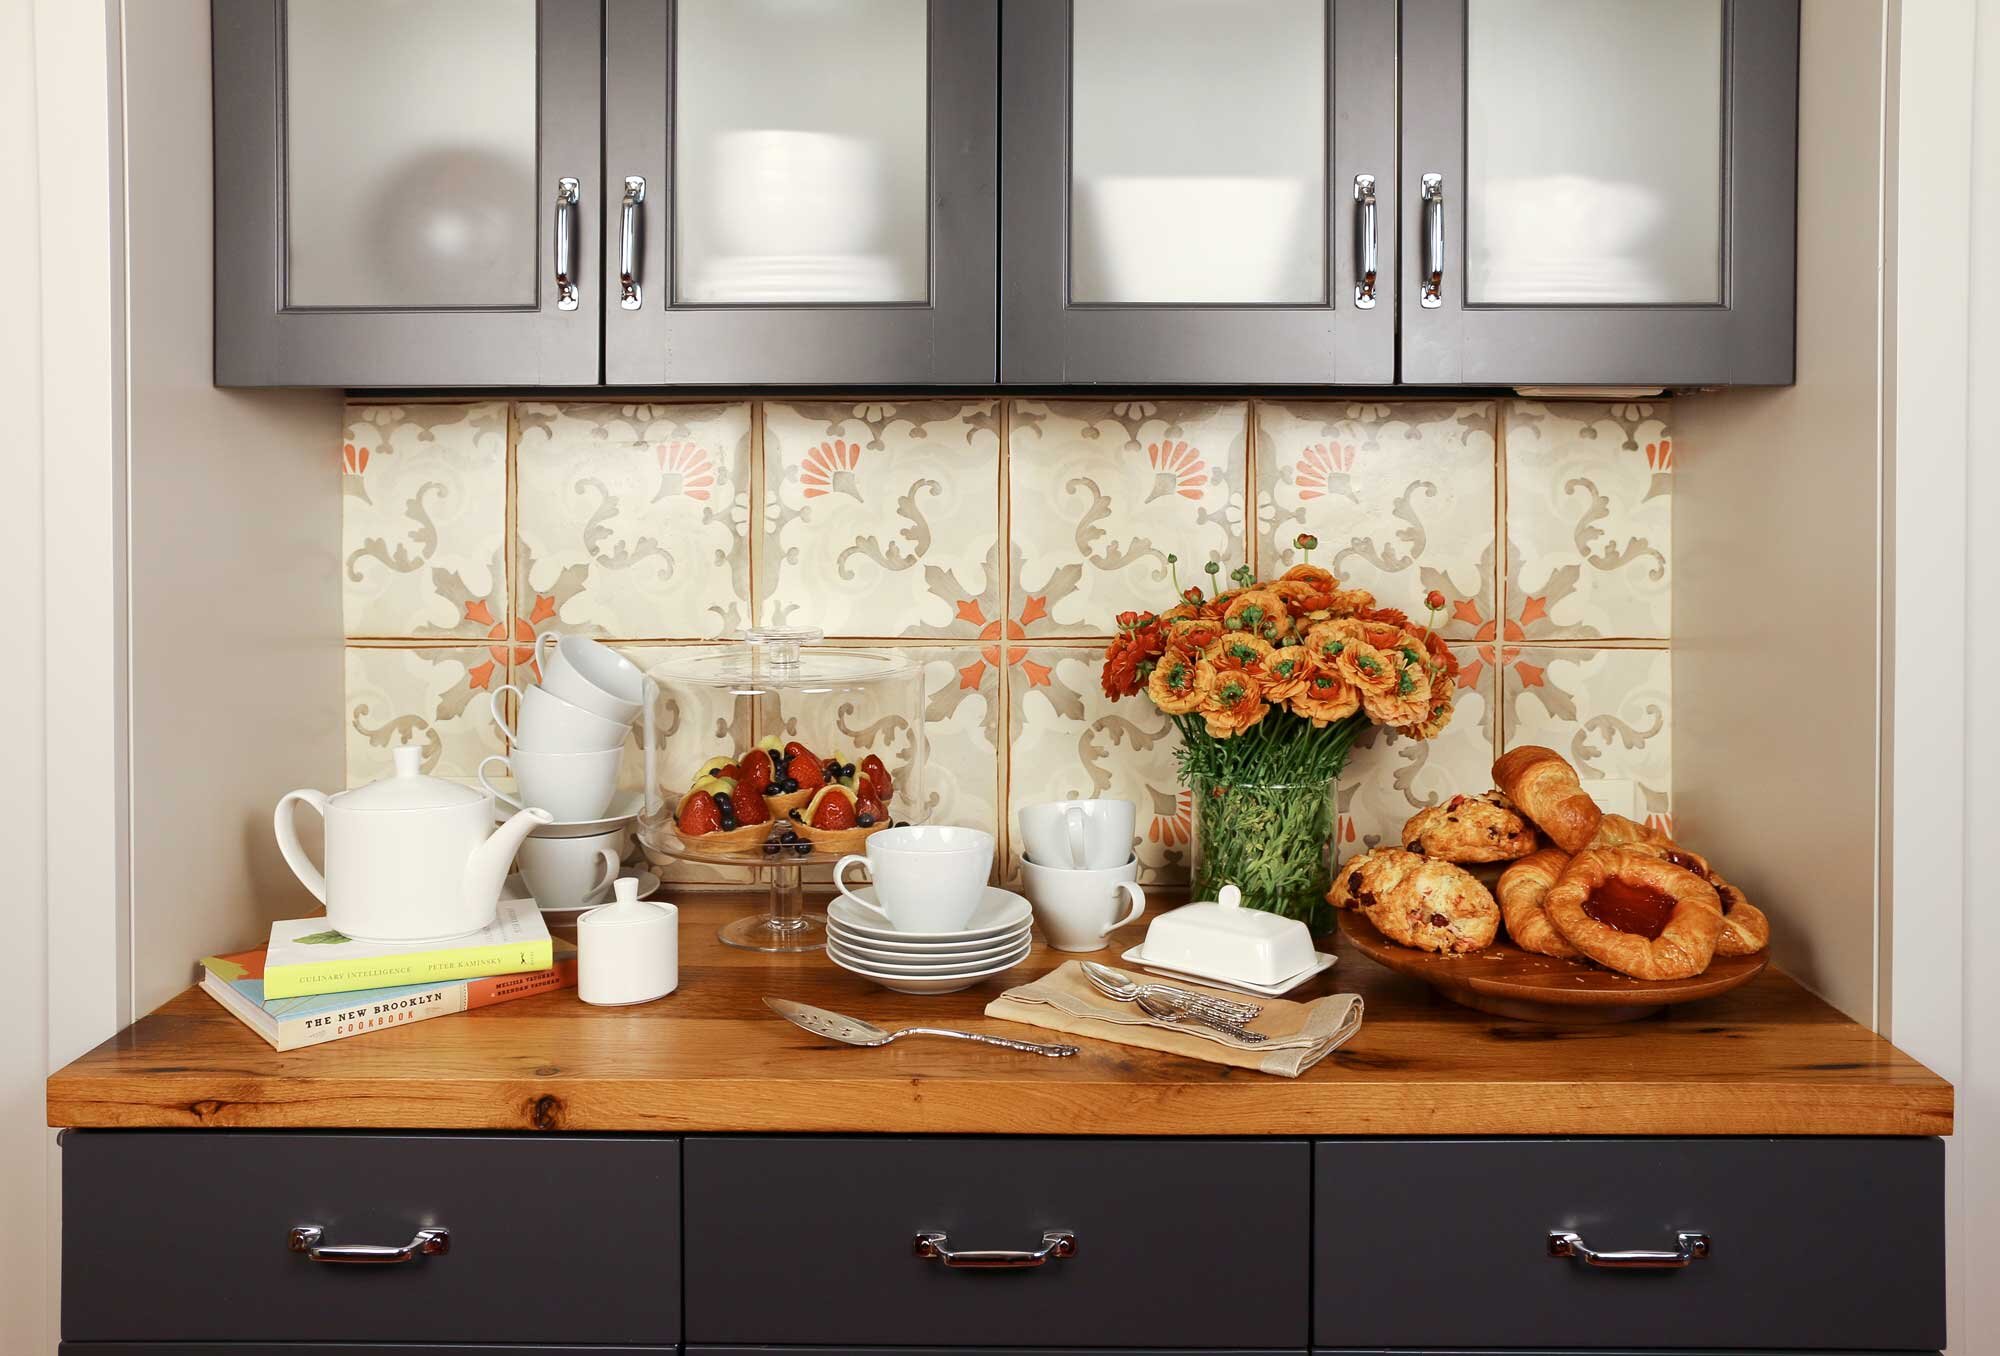 The light gray upper cabinets and dark gray base cabinets are offset with the more artistic and hand-painted custom backsplash, reclaimed antique wood countertop and red range.